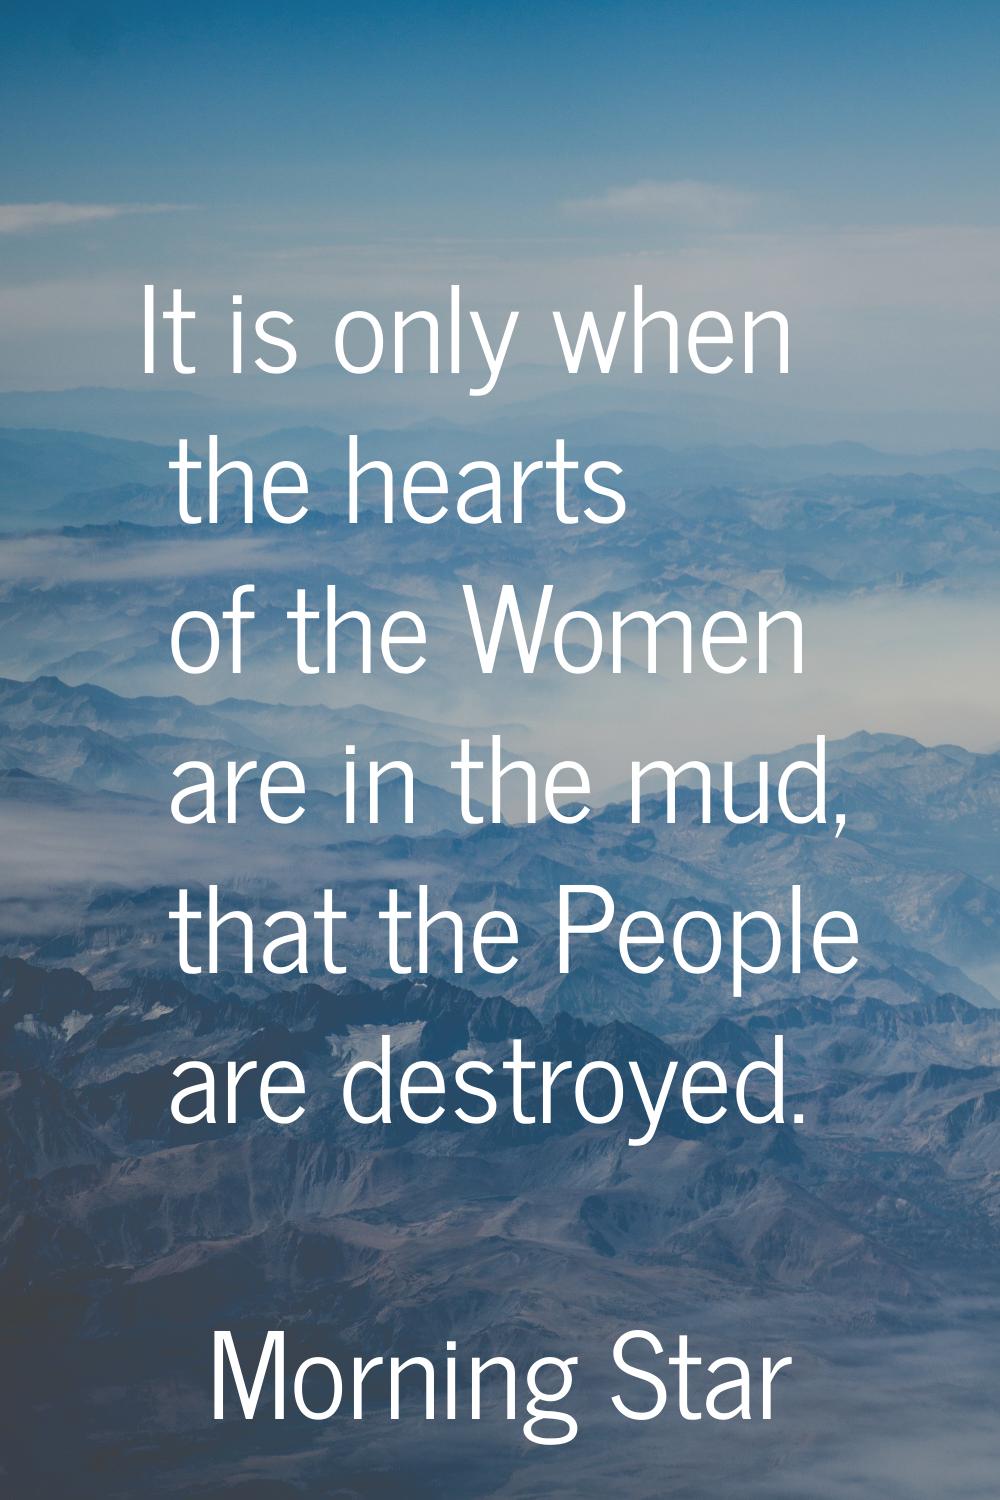 It is only when the hearts of the Women are in the mud, that the People are destroyed.